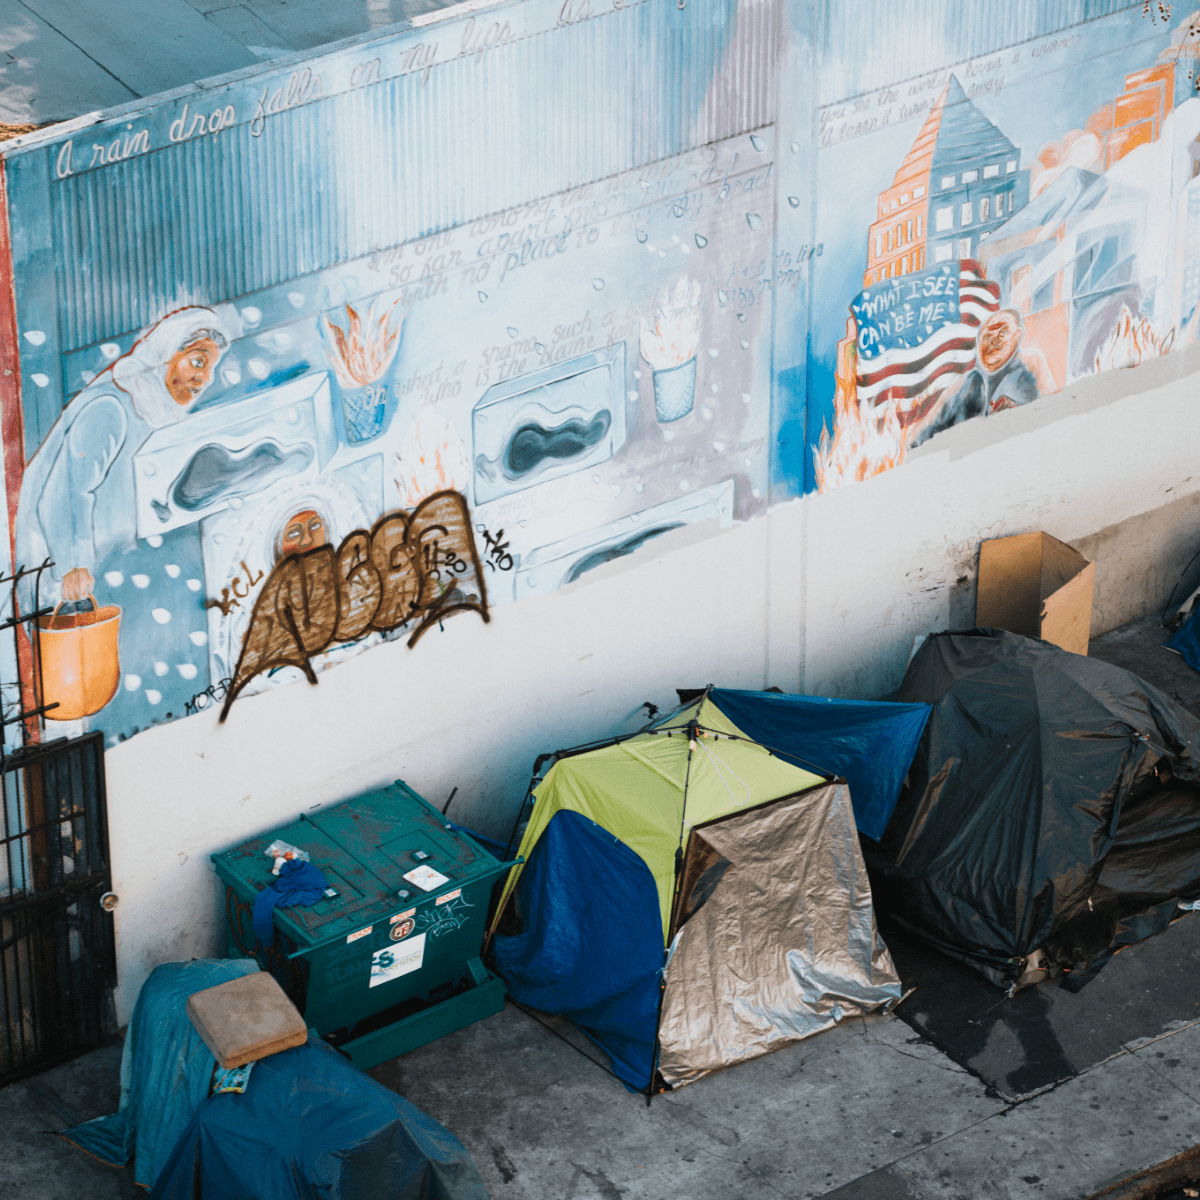 tents for the homeless on a city sidewalk